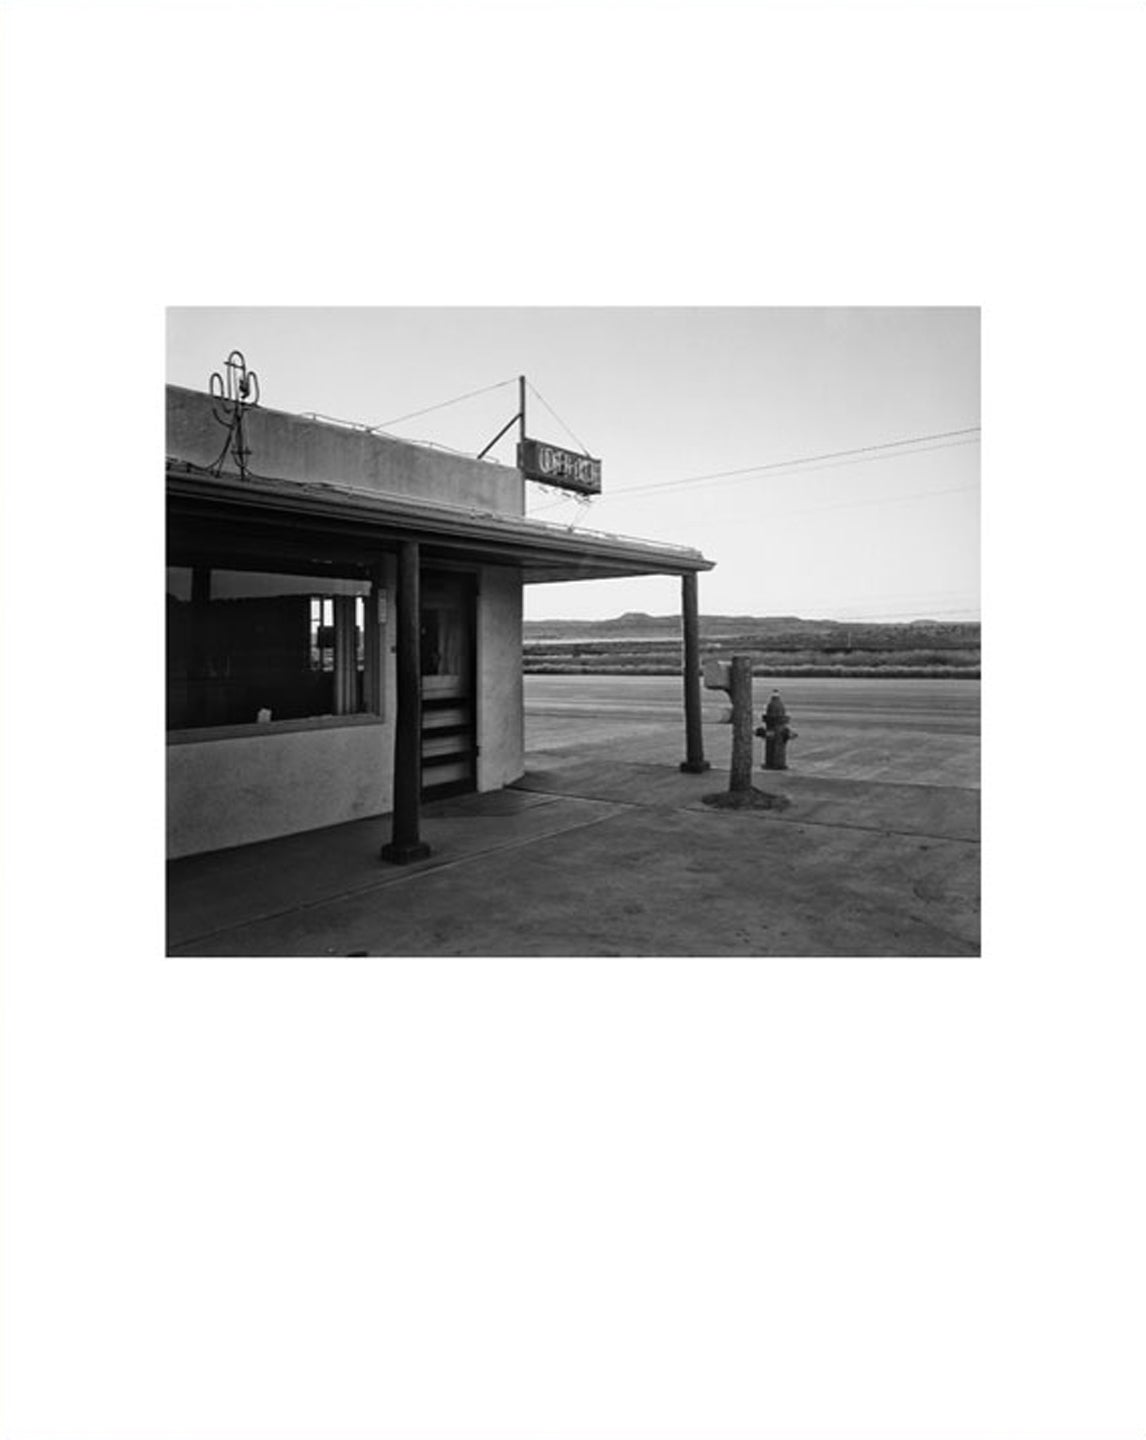 NZ Library #1: John Schott: Route 66, Special Limited Edition (with Gelatin Silver Contact Print "Untitled" from the Series "Route 66 Motels," Intersection and a Fina Service Station) (NZ Library - Set One, Volume Six)